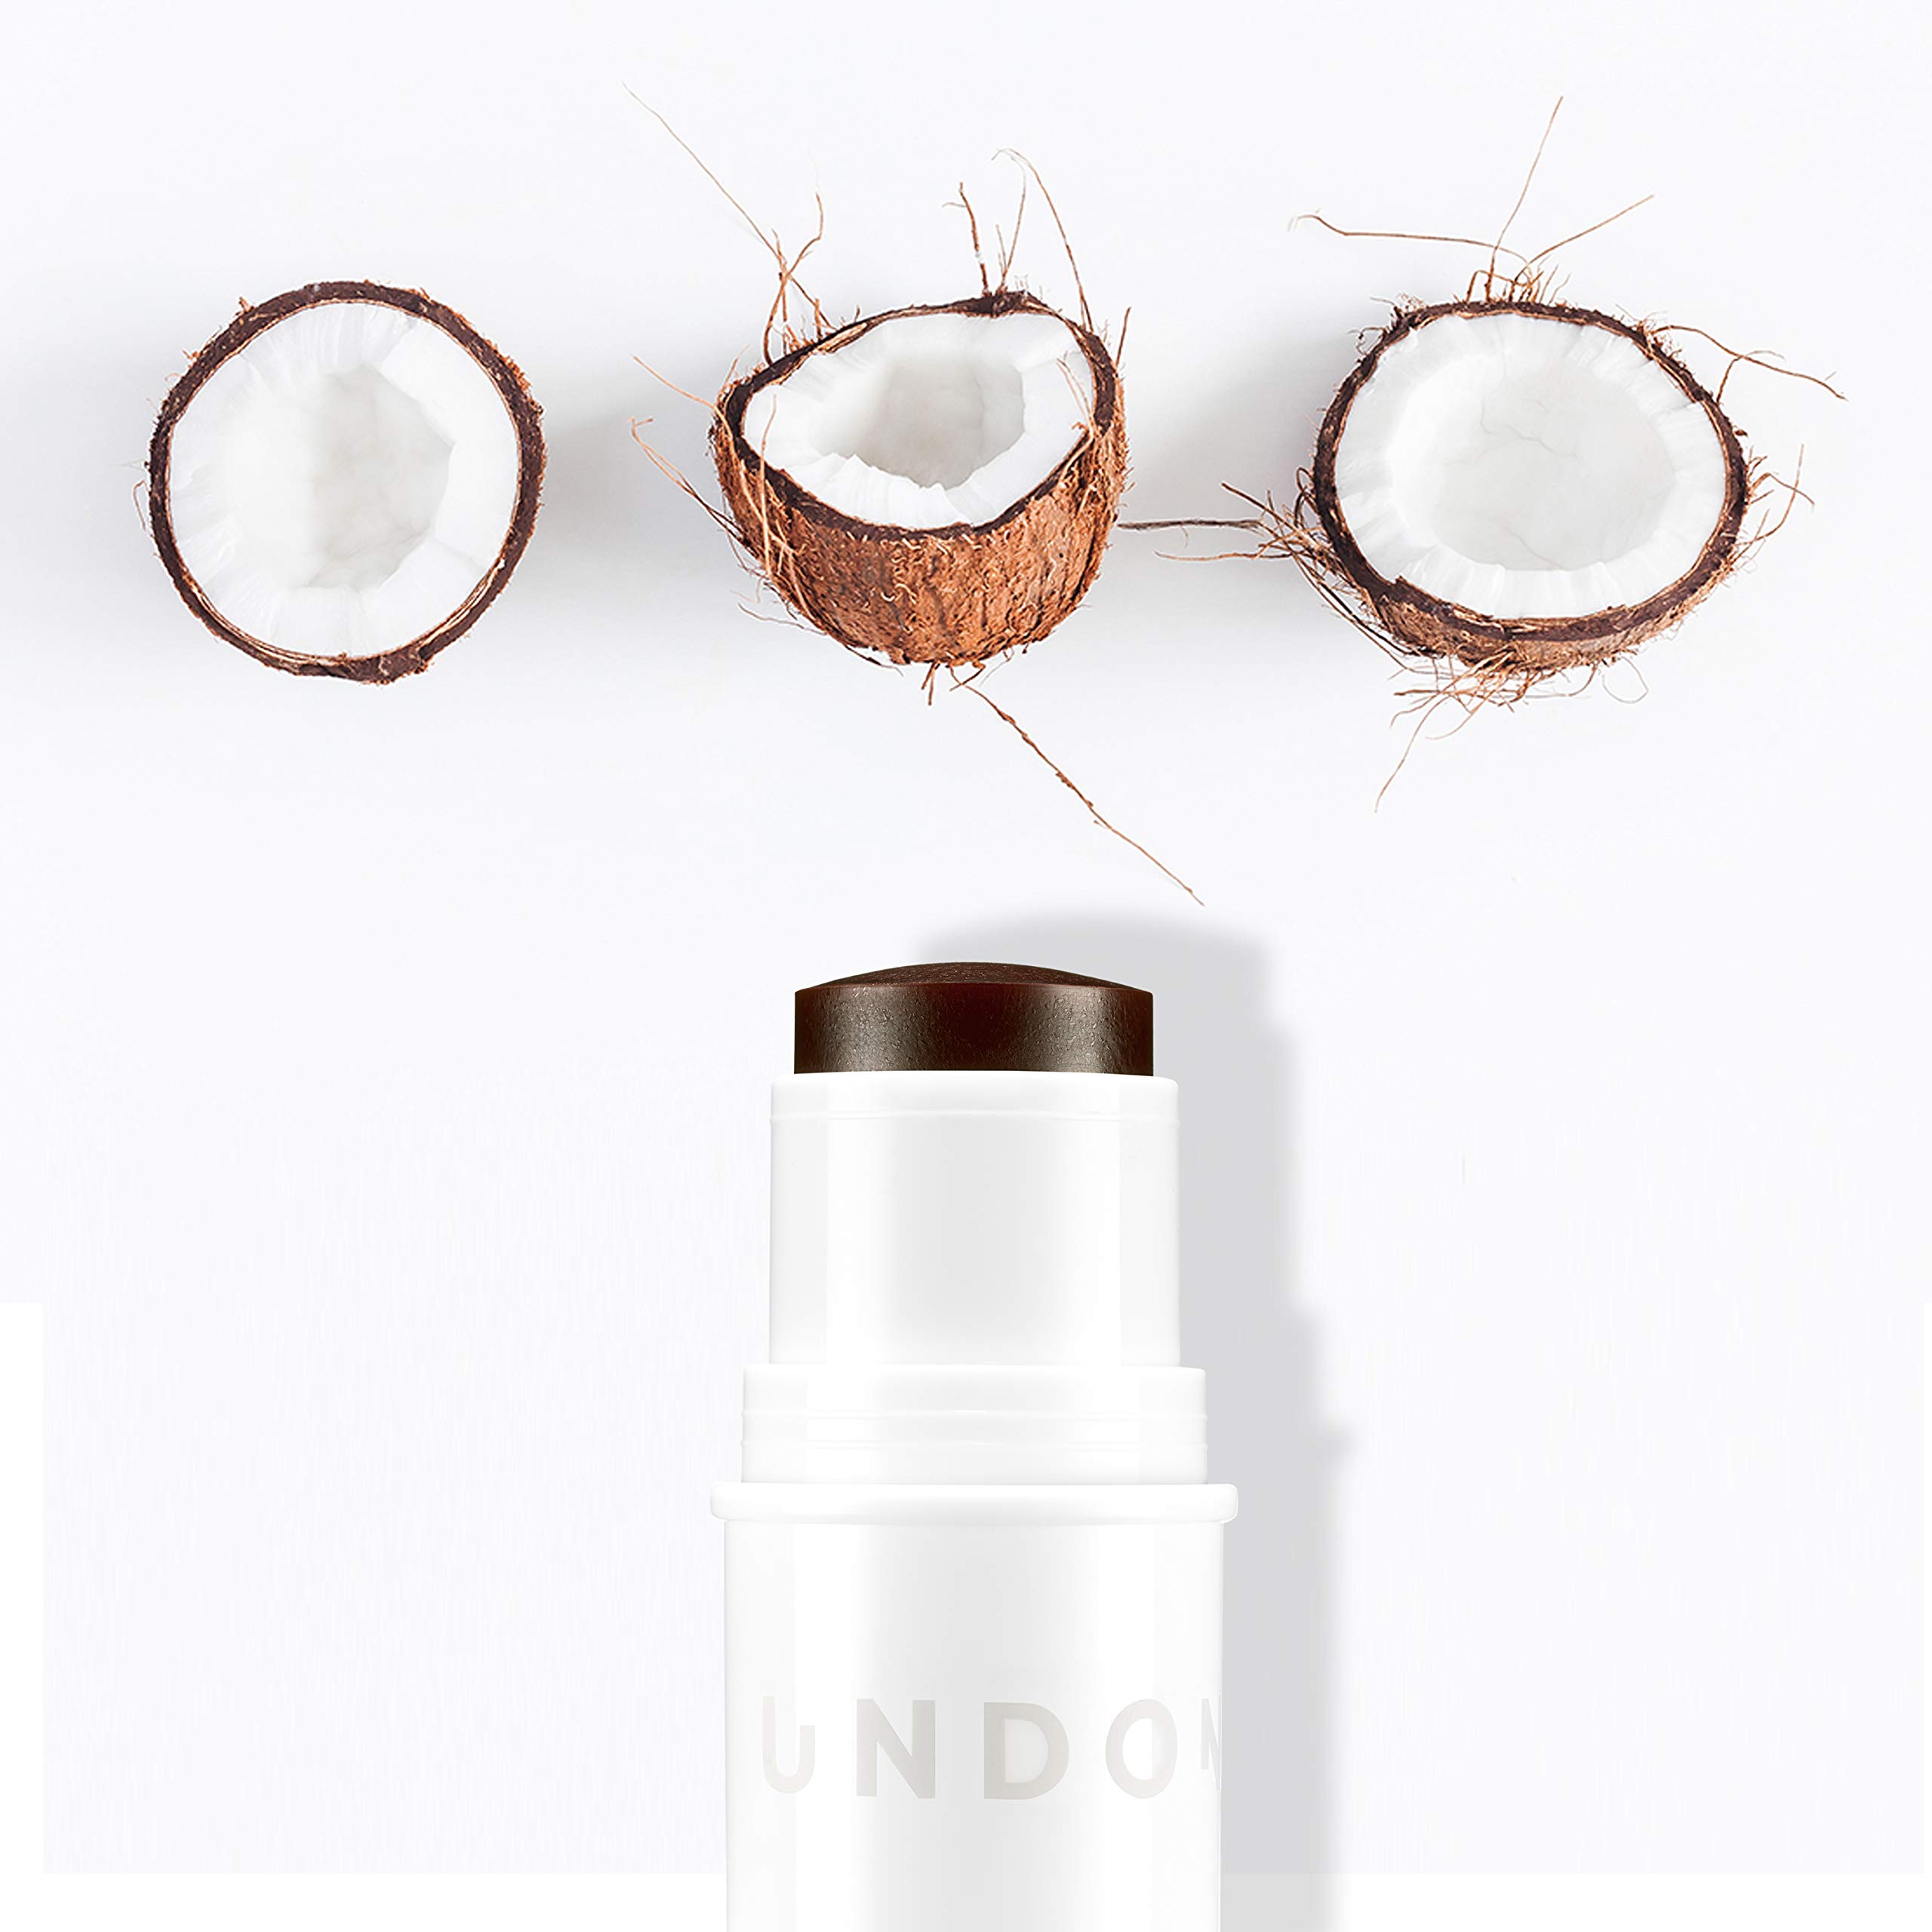 Undone Beauty Water Bronzer Stick - Coconut for Radiant, Dewy Glow and a Natural Looking Tan with No Streaks, Lines, or Mistakes - Vegan & Cruelty Free - Baked, 0.19 oz (5g)